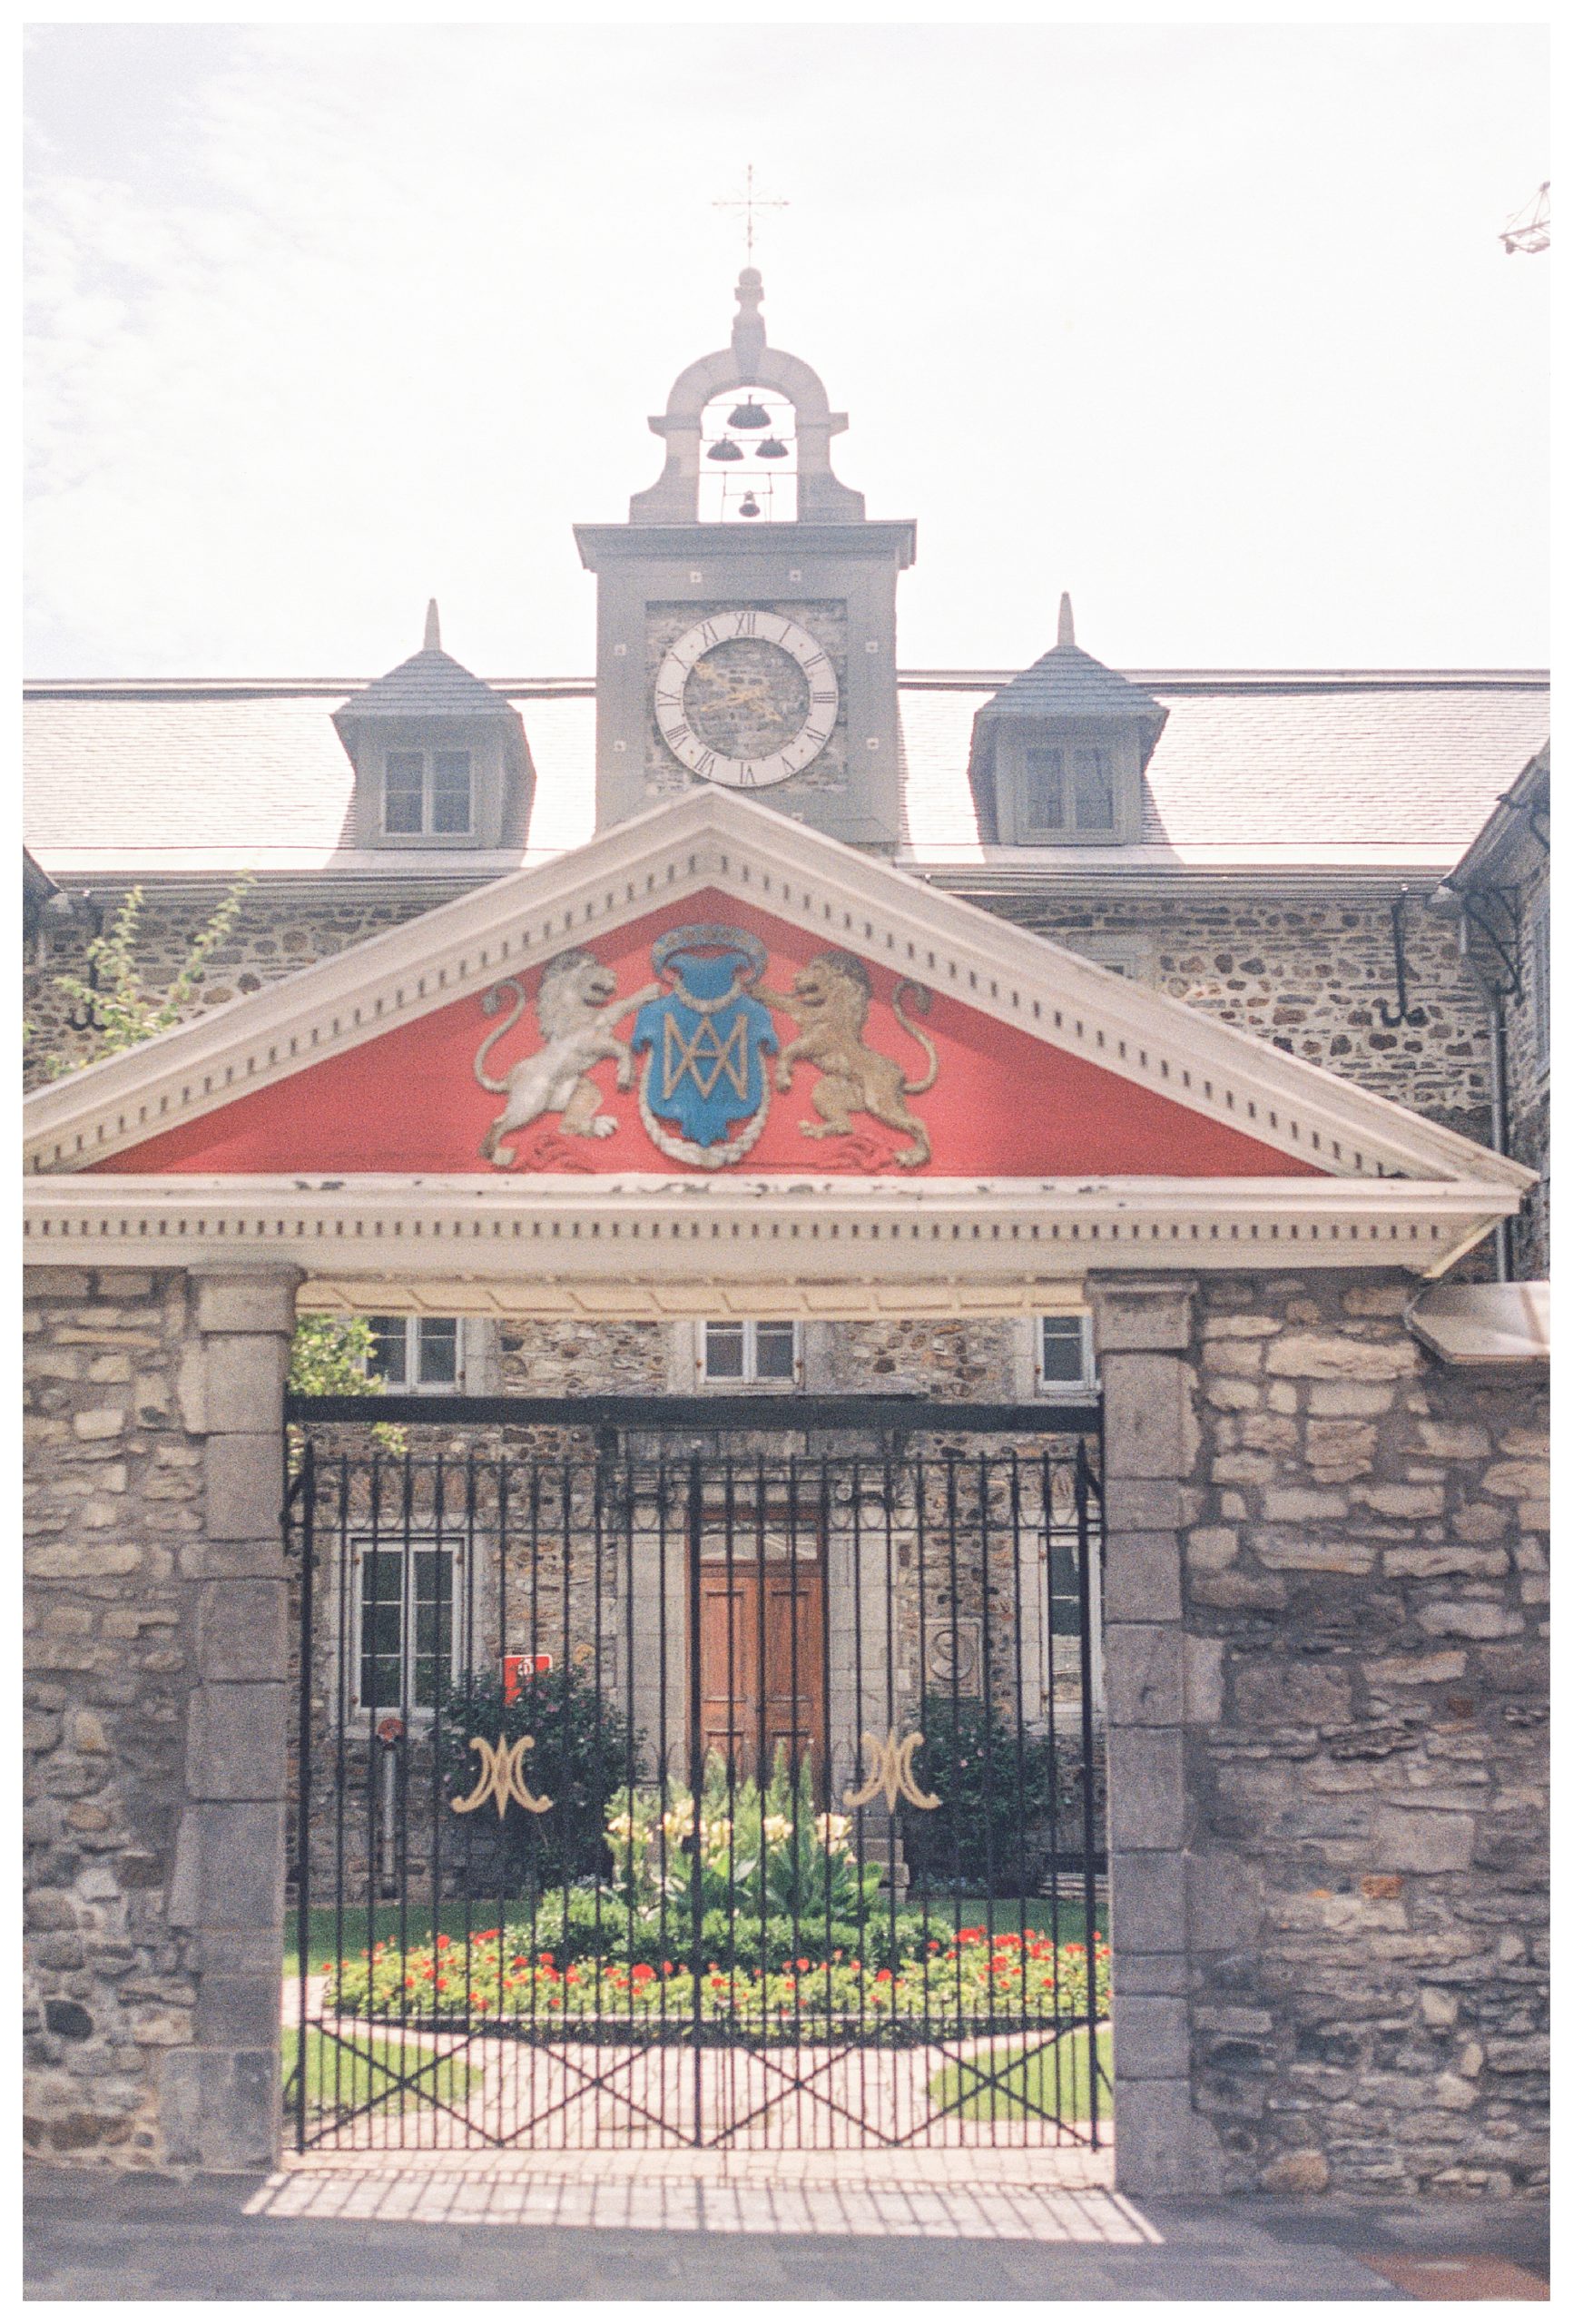 The rectory of Notre Dame Cathedral in Montreal, Canada.